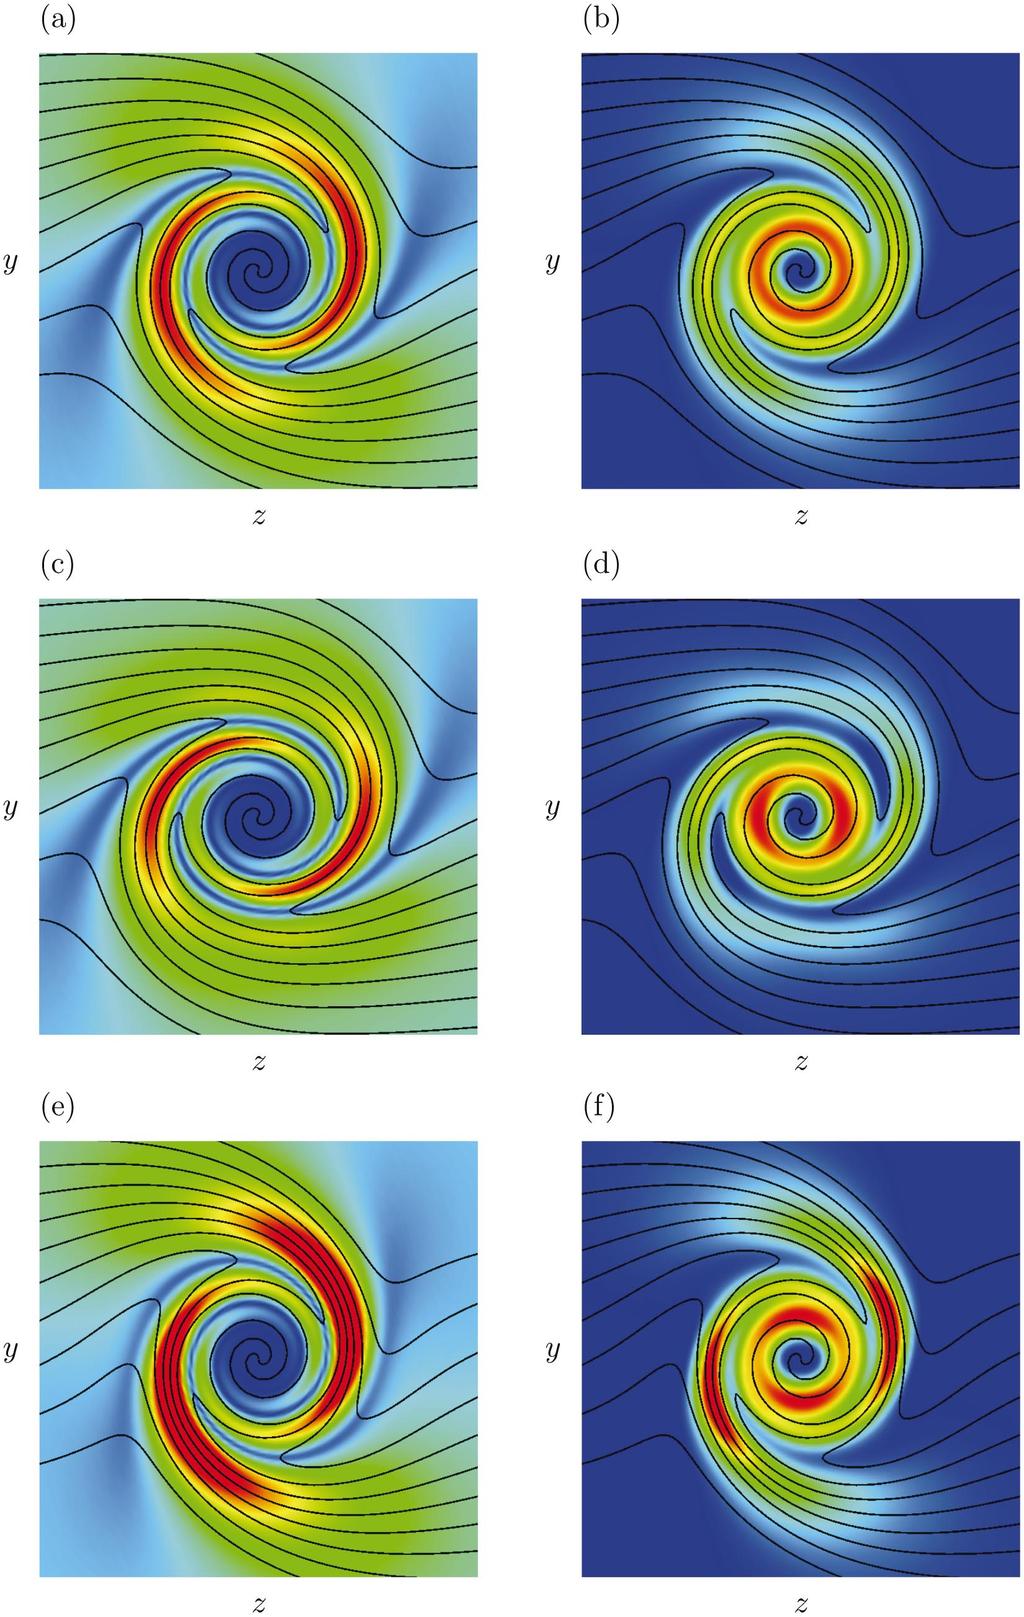 055111-5 Energy dissipation in spiral vortex layers Phys. Fluids 17, 055111 005 FIG. 1. Color.